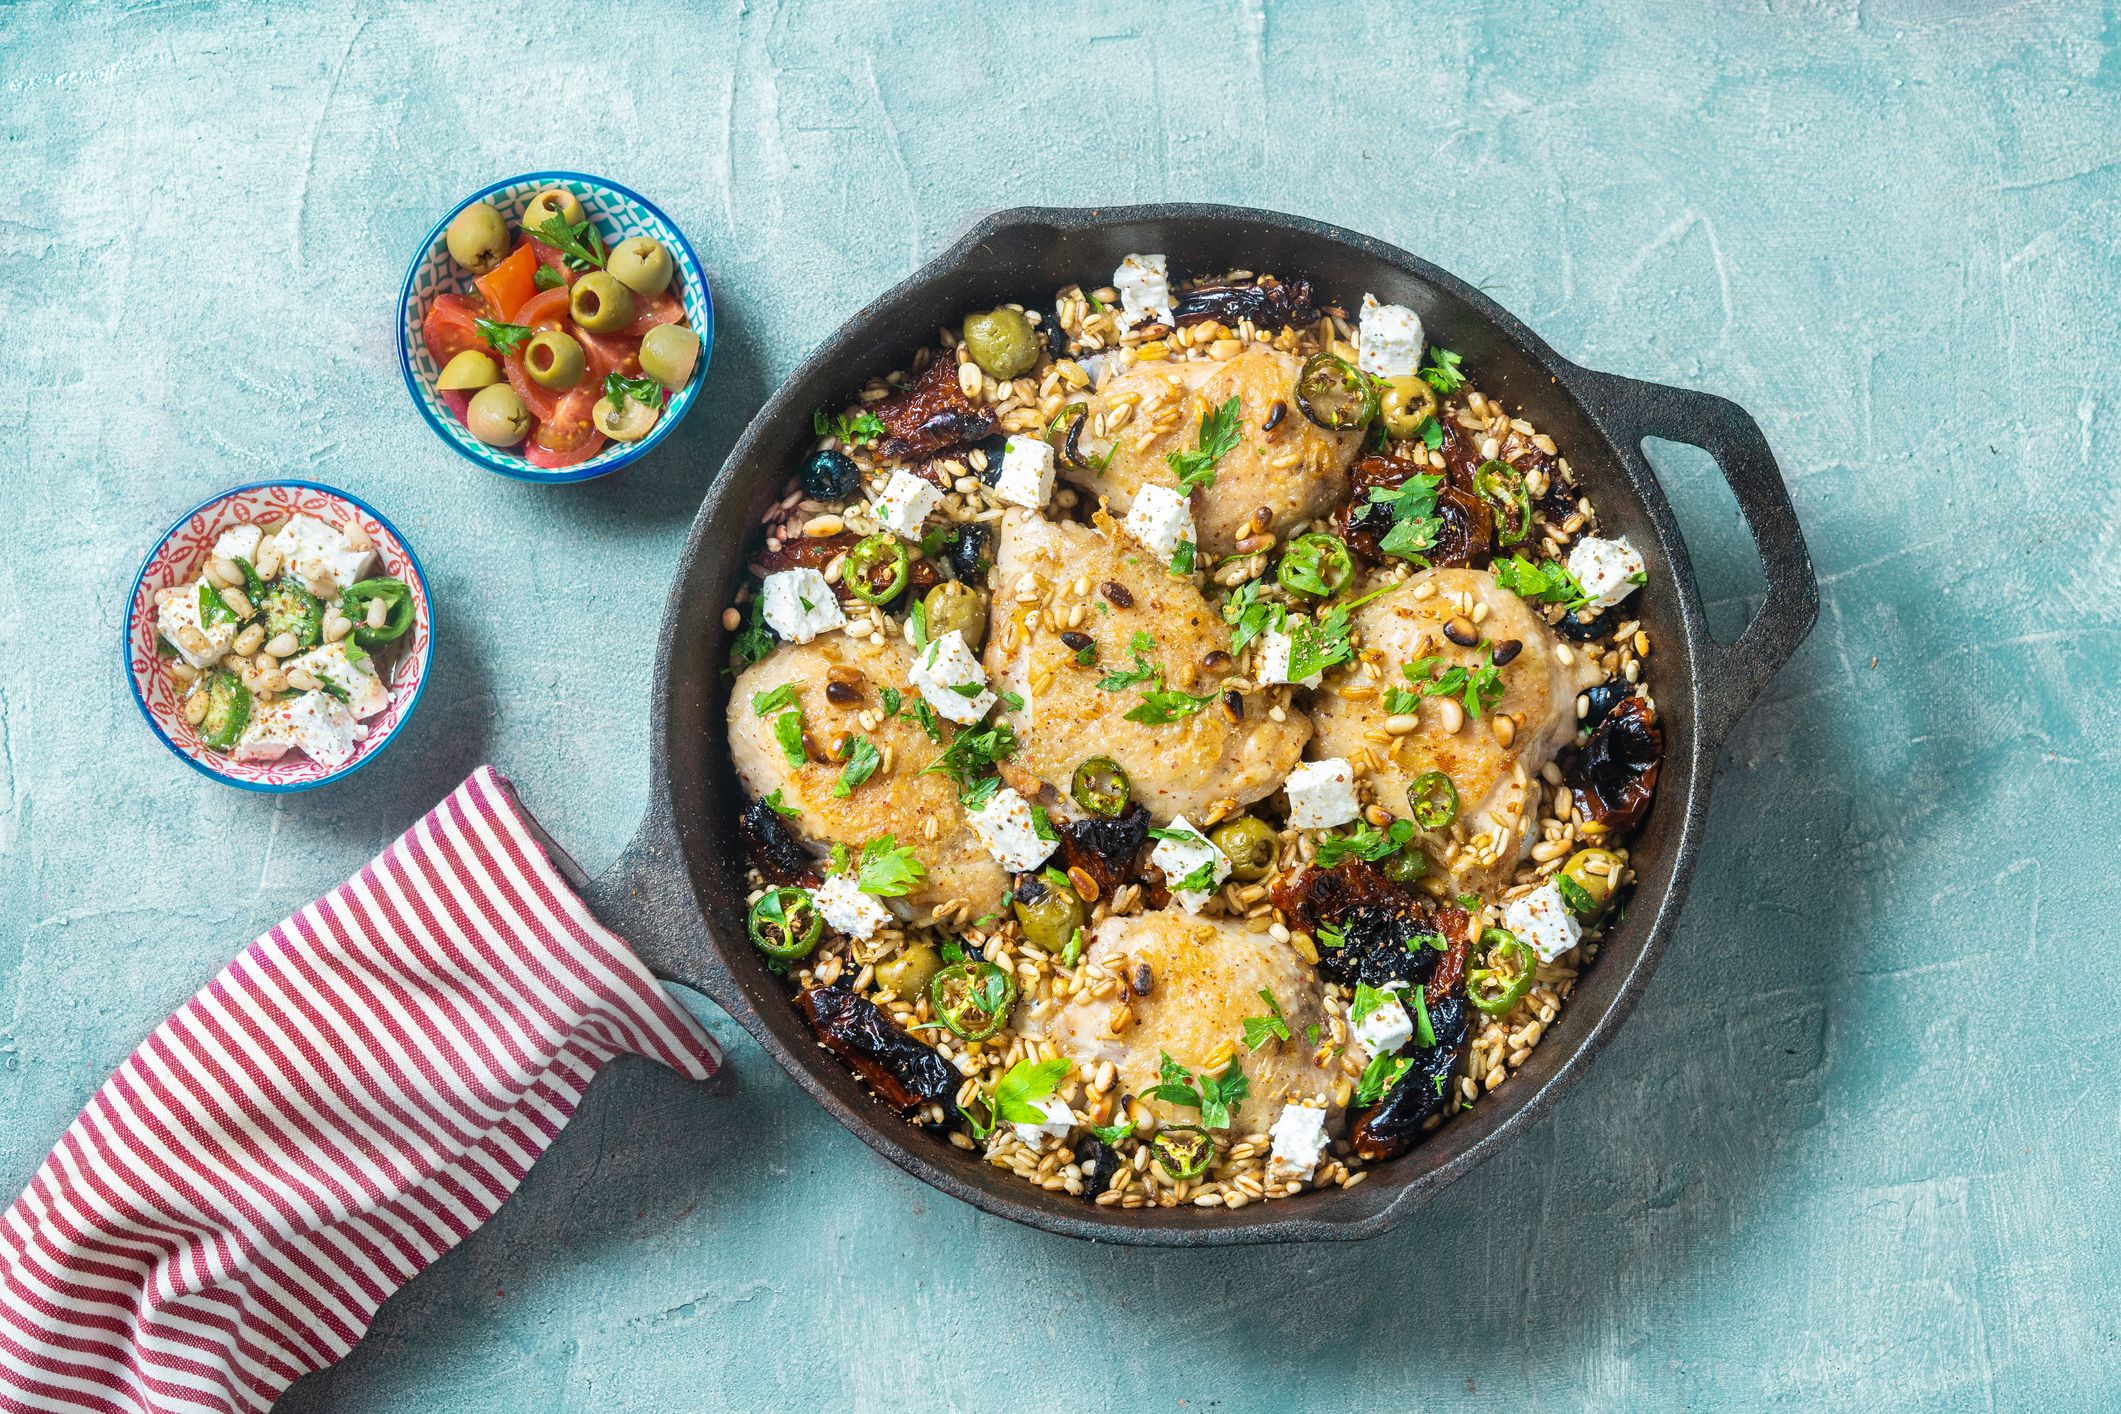 https://hips.hearstapps.com/hmg-prod/images/chicken-with-farro-and-feta-cheese-royalty-free-image-1643908593.jpg